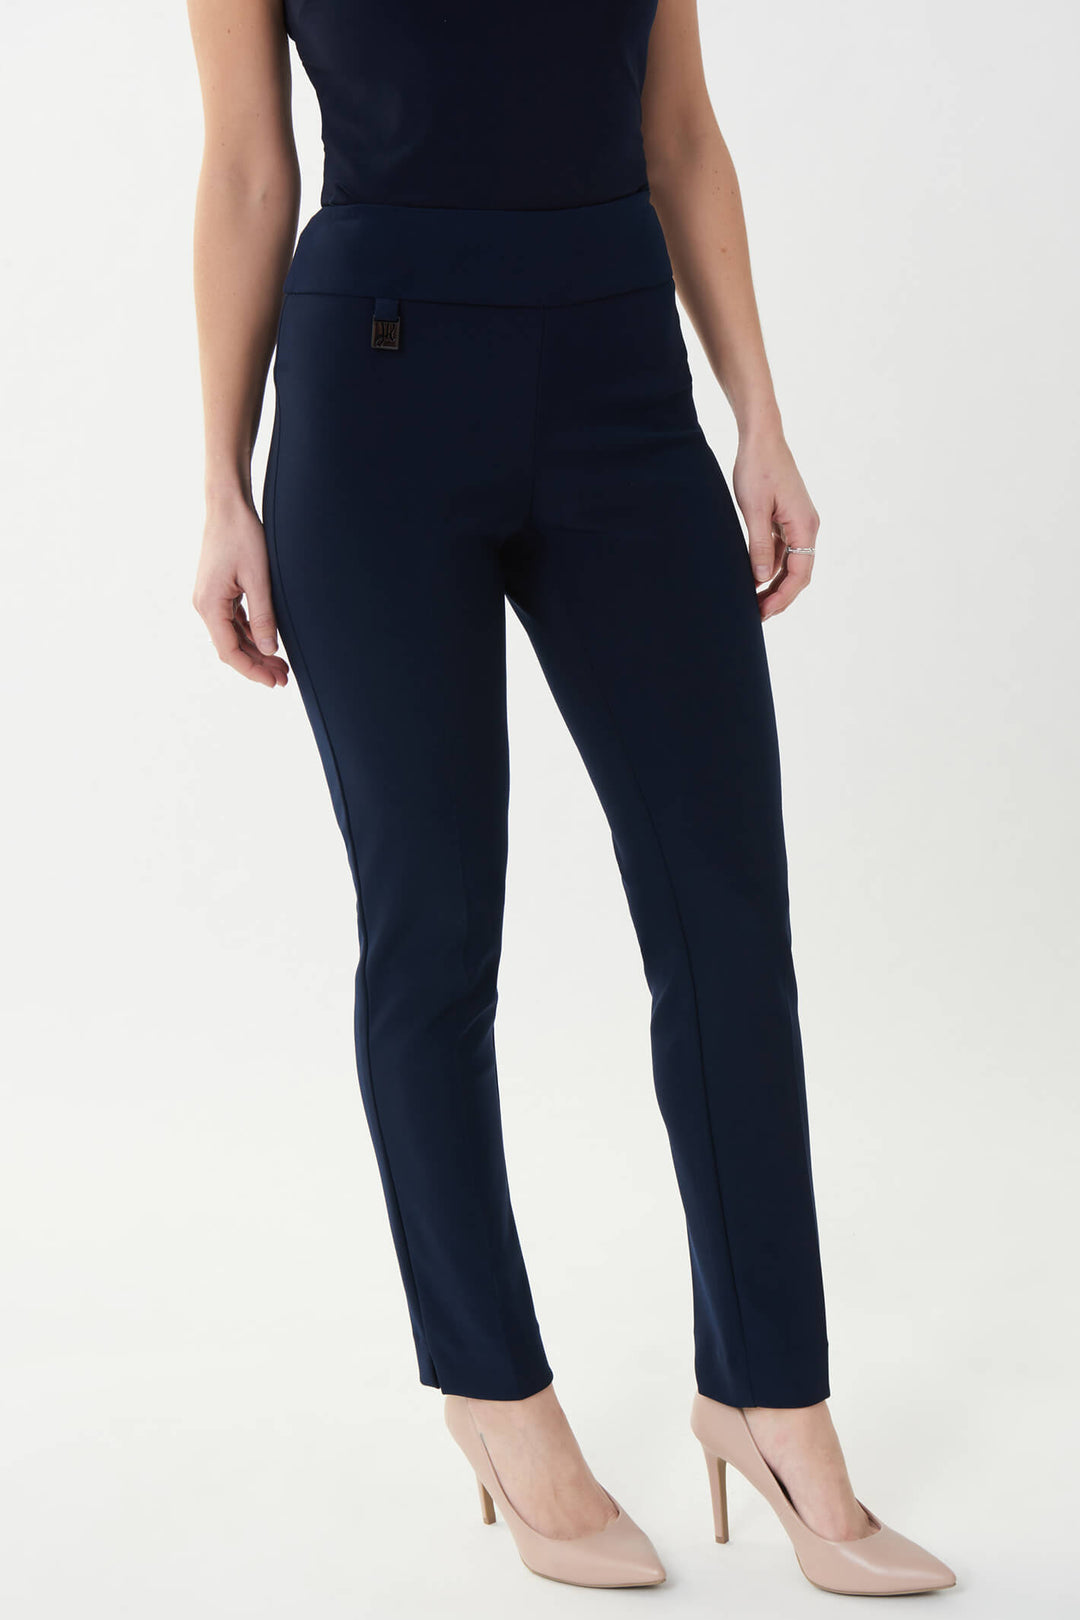 Joseph Ribkoff 144092S Navy Pull-On Trousers - Experience Boutique